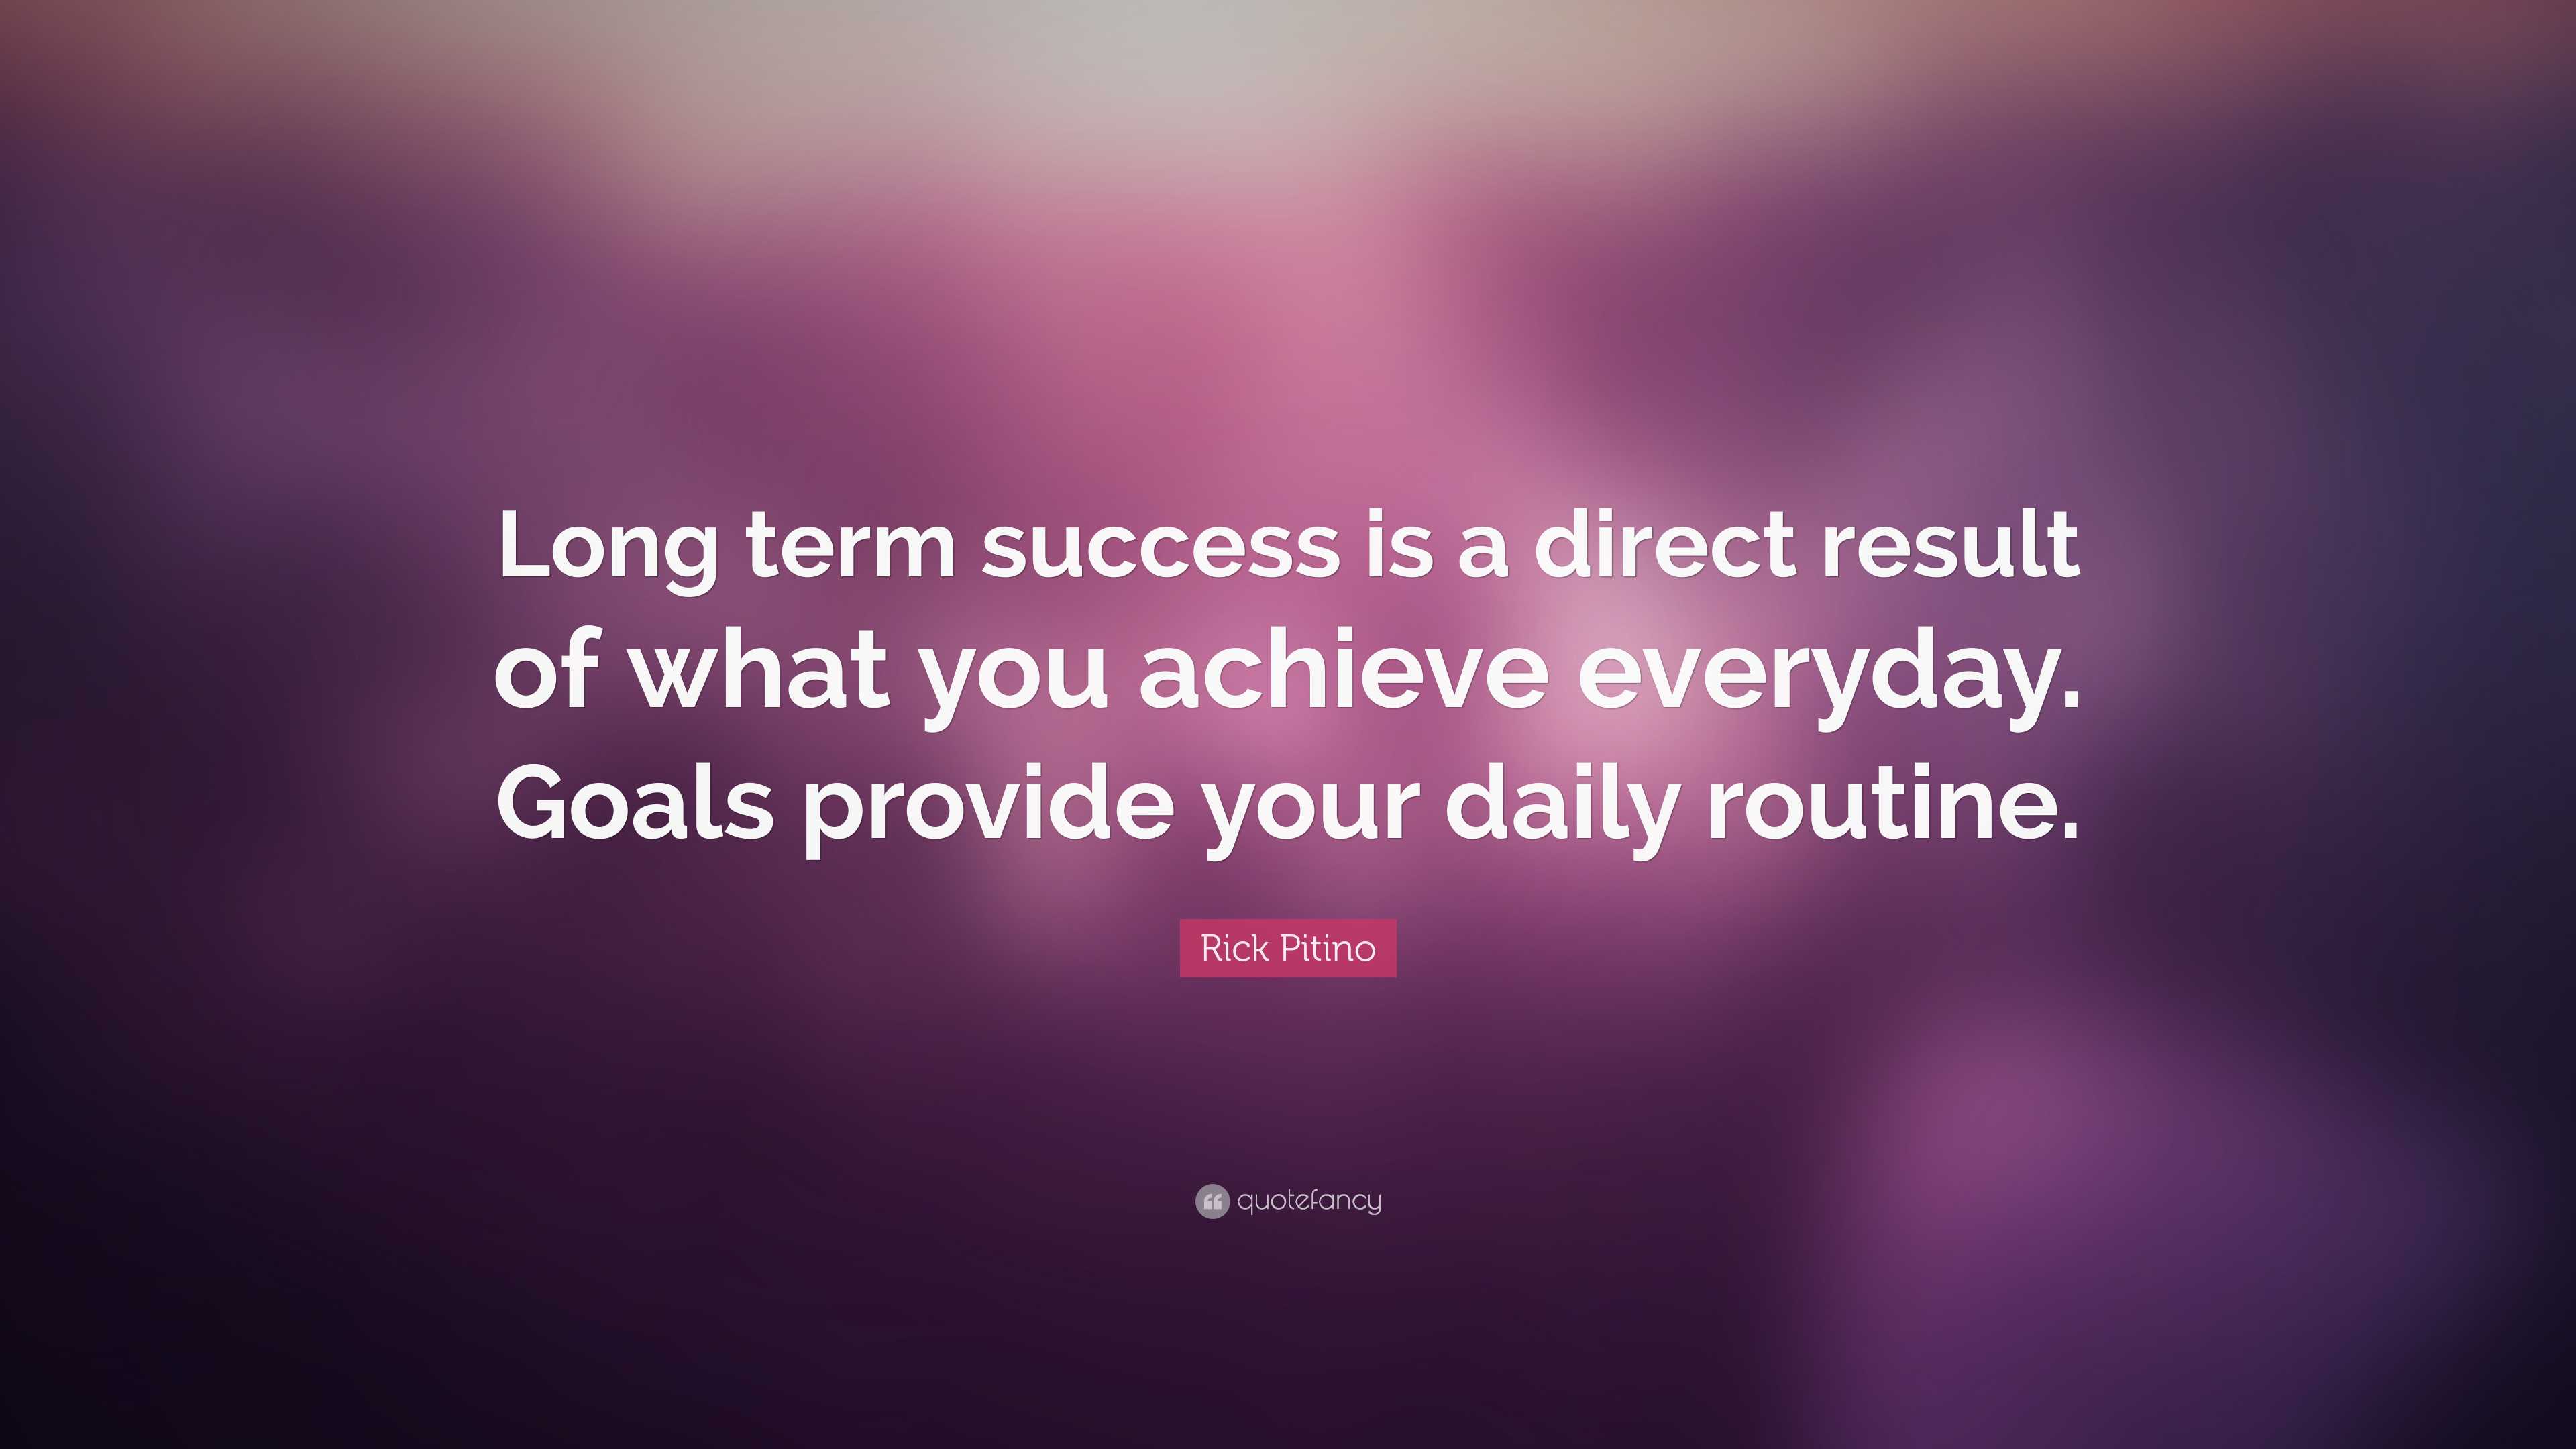 Rick Pitino Quote: “Long term success is a direct result of what you ...